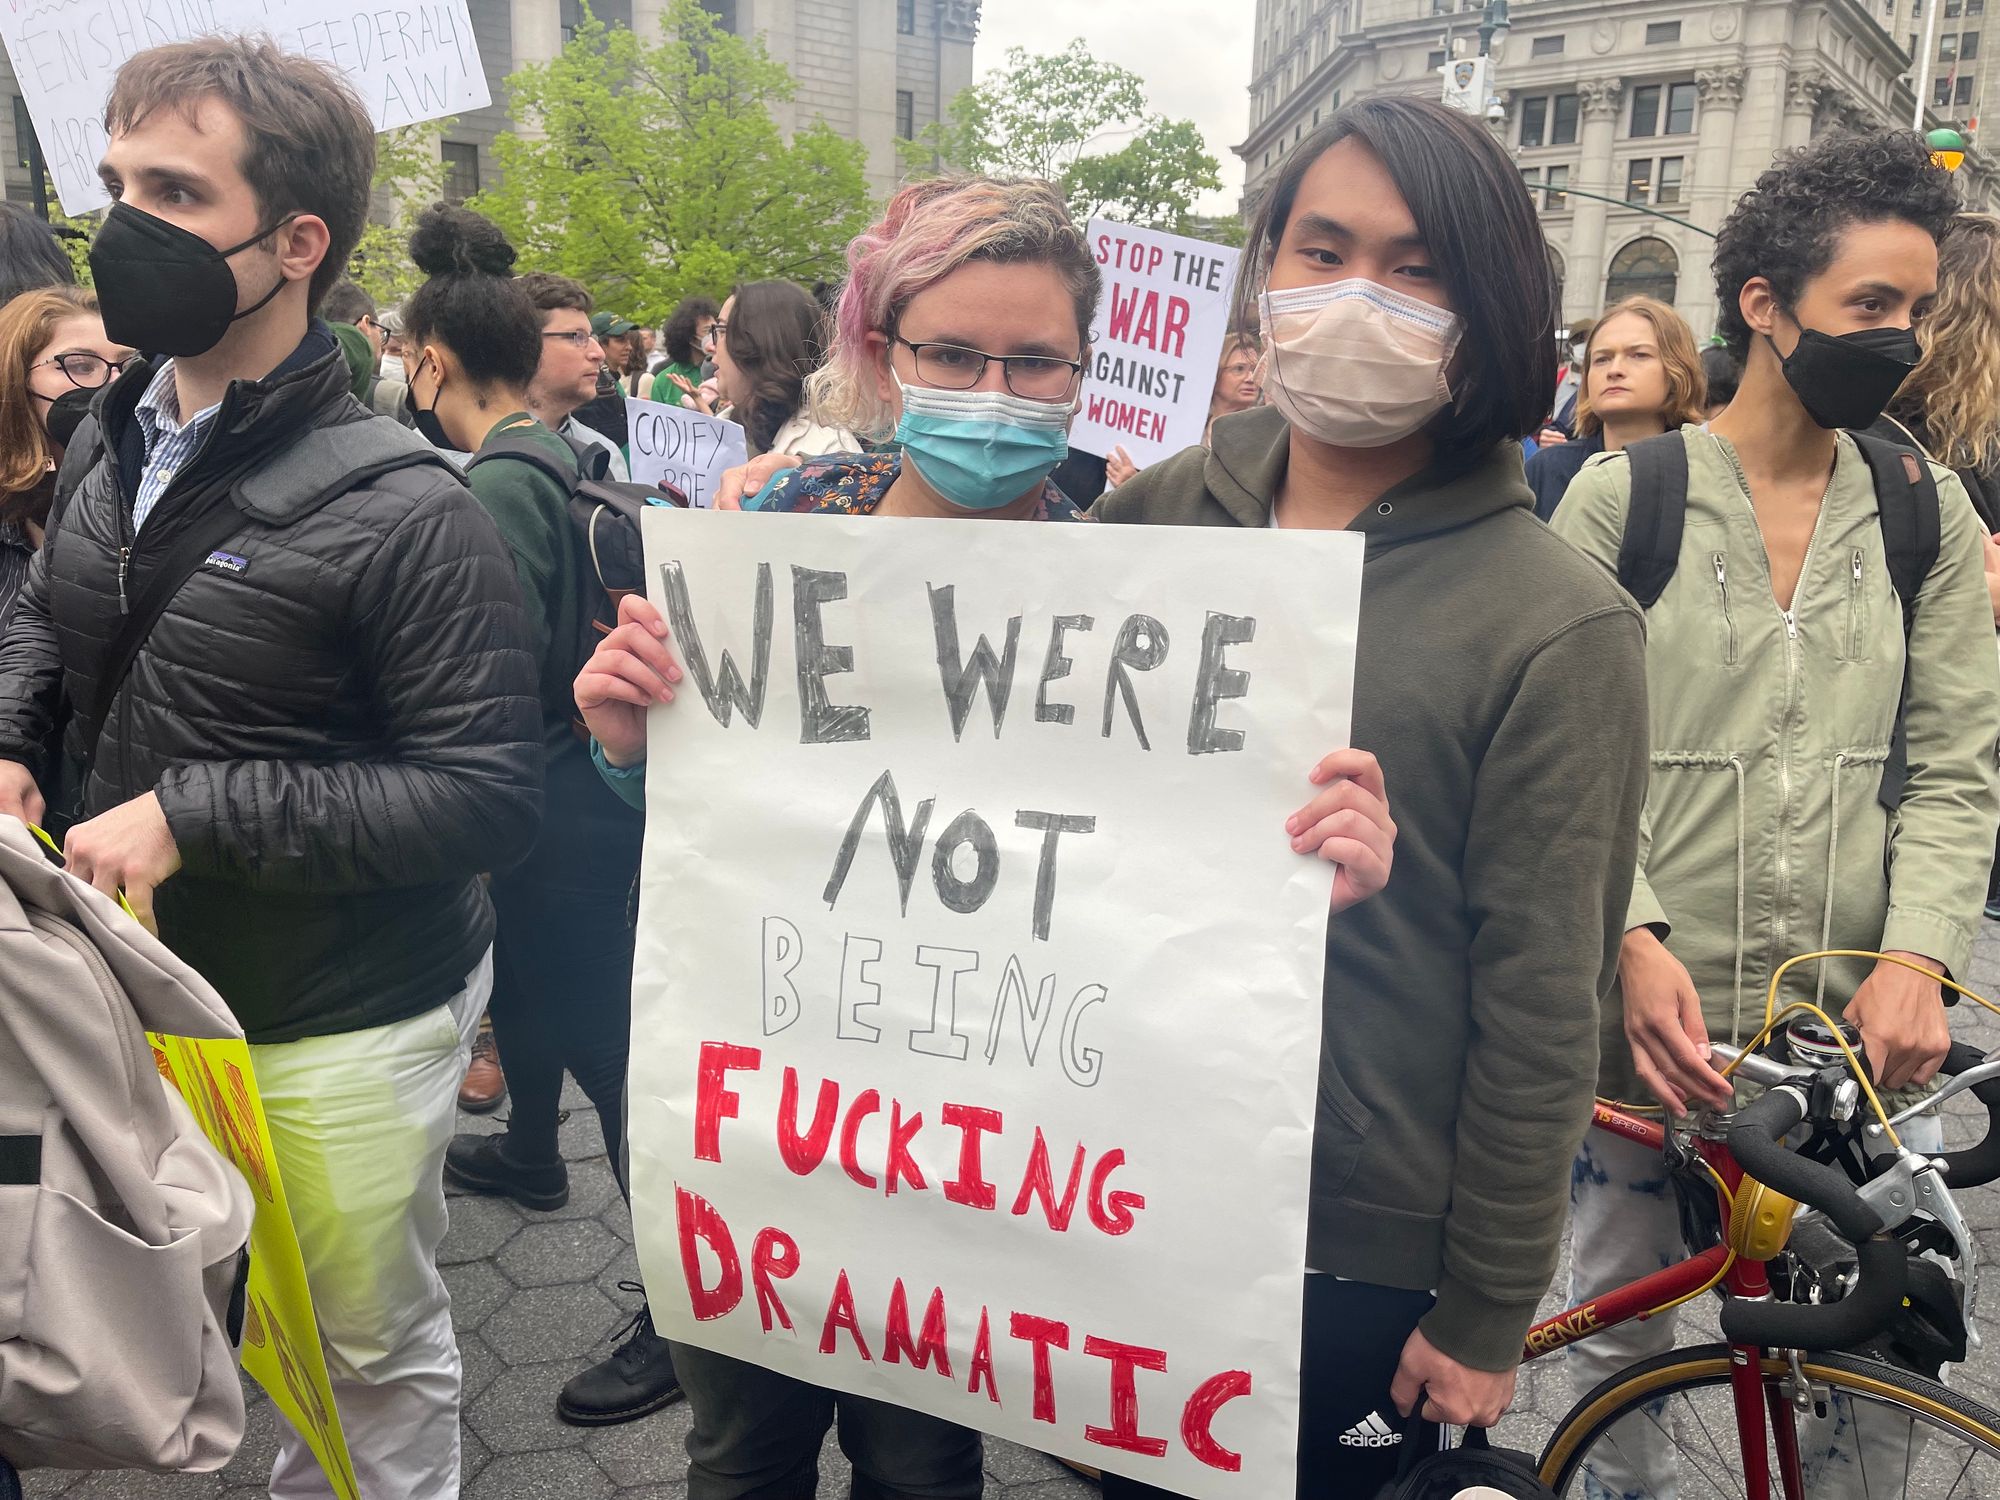 Two people holding a sign that says "We were not being fucking dramatic."